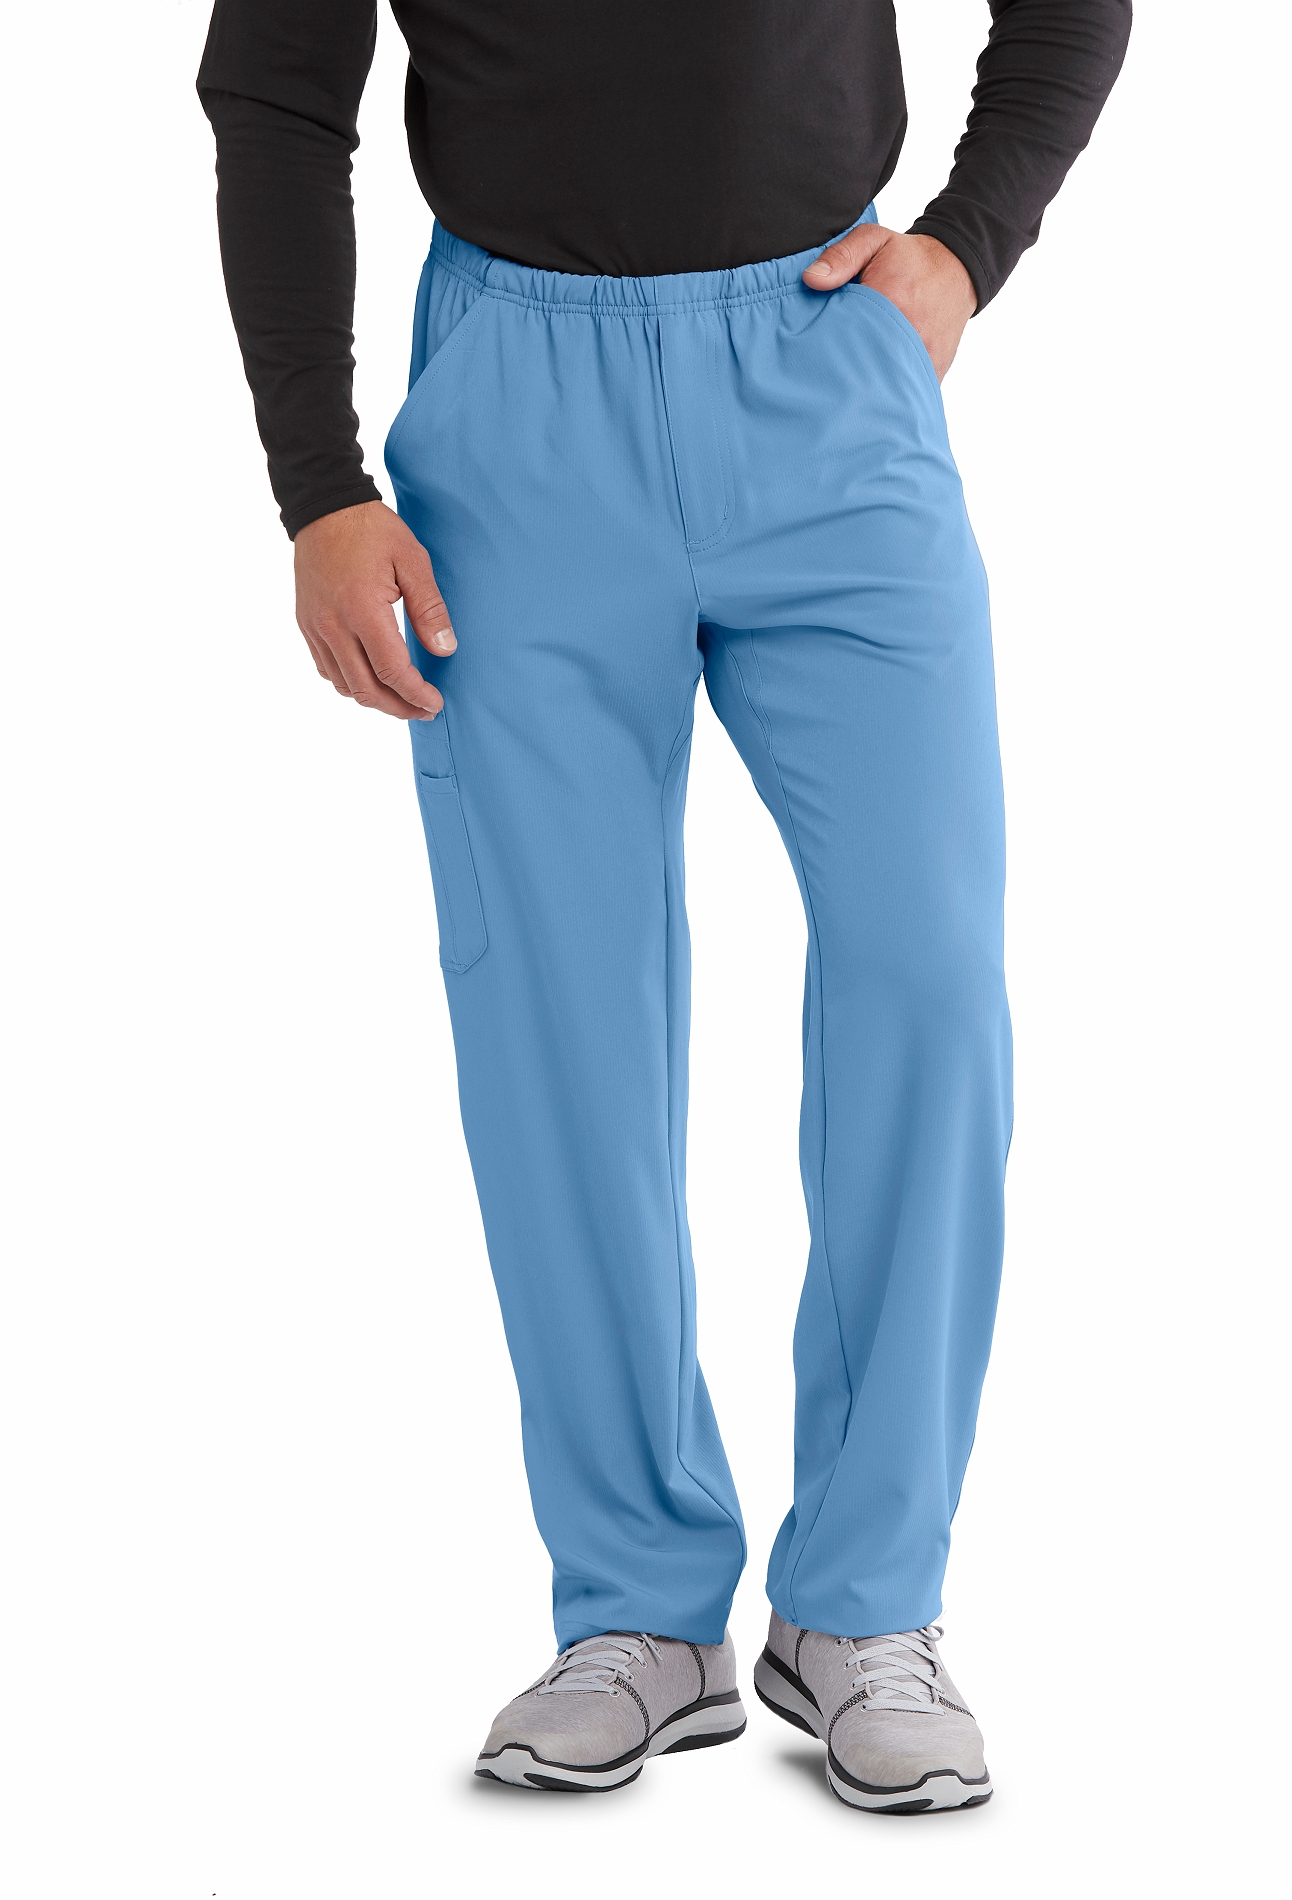 https://medicalscrubscollection.com/content/images/thumbs/0752596_skechers-mens-structure-cargo-scrub-pants-sk0215.jpeg